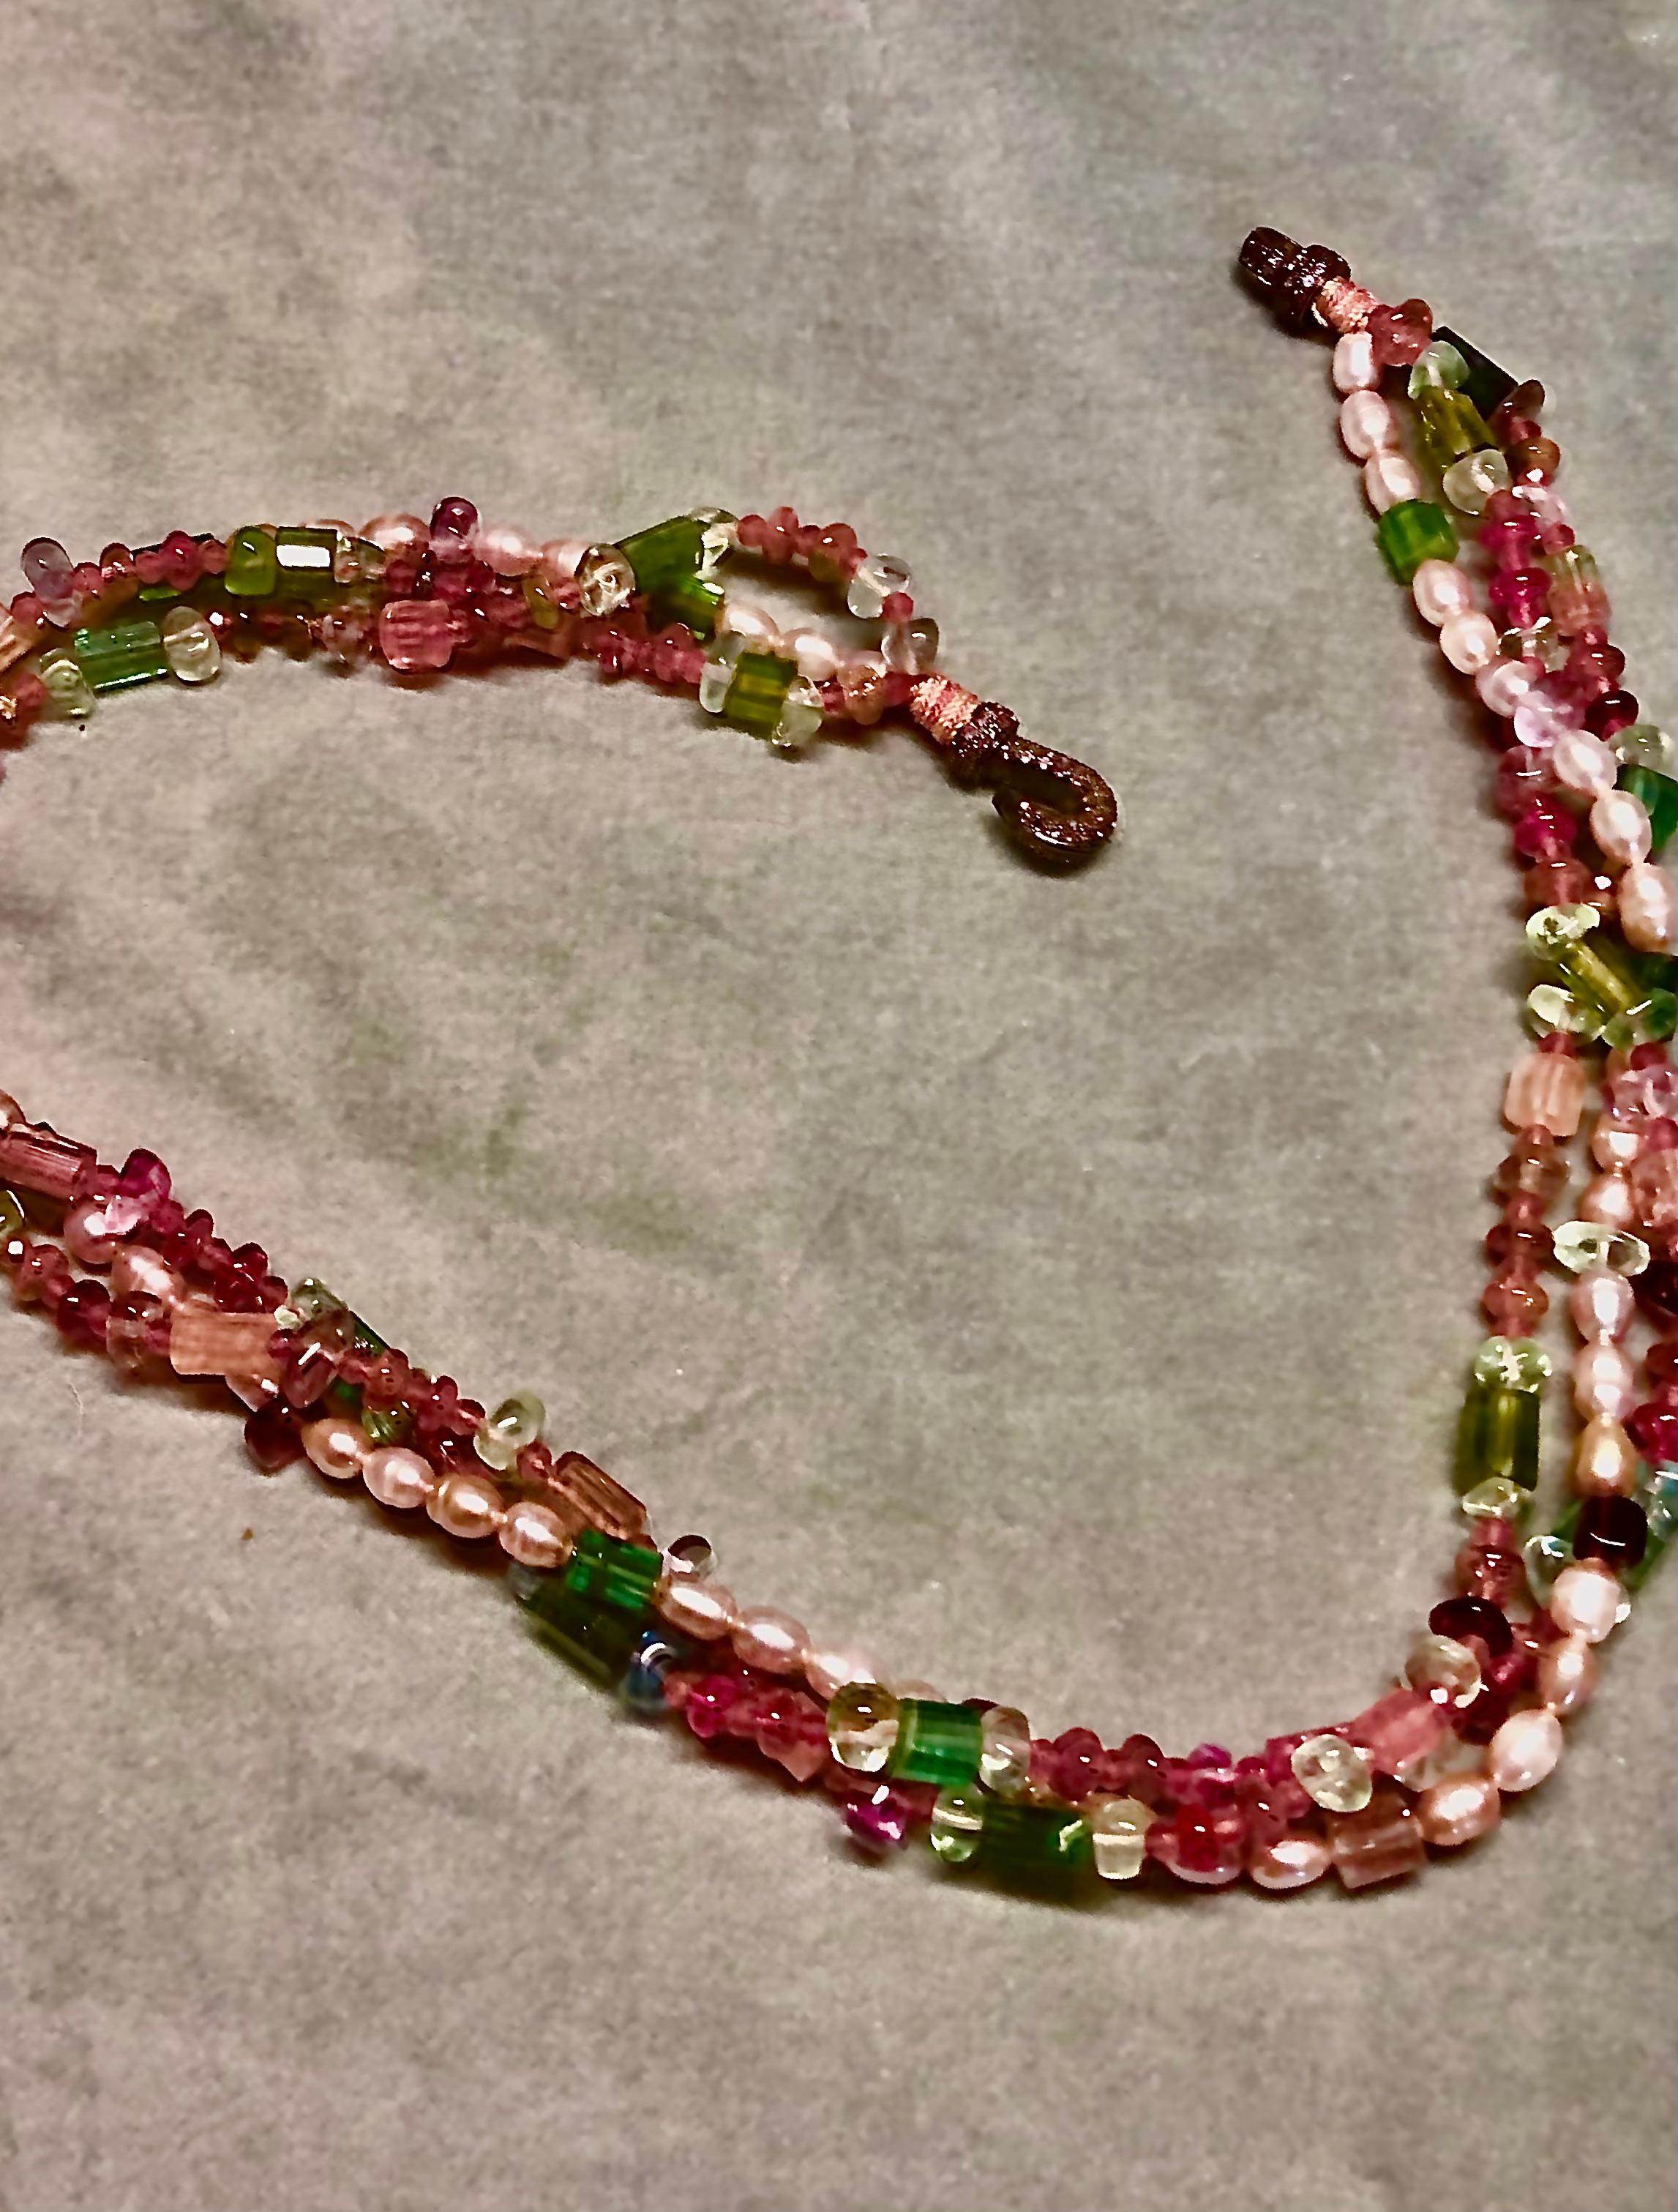 Ultra pretty, stunning tourmaline and pink cultured pink baroque freshwater pearls torsade multi strand necklace with blackened sterling silver and pink sapphire pave hook and eye clasp. Pink, deep pink, rich green and indicolite tourmaline nugget